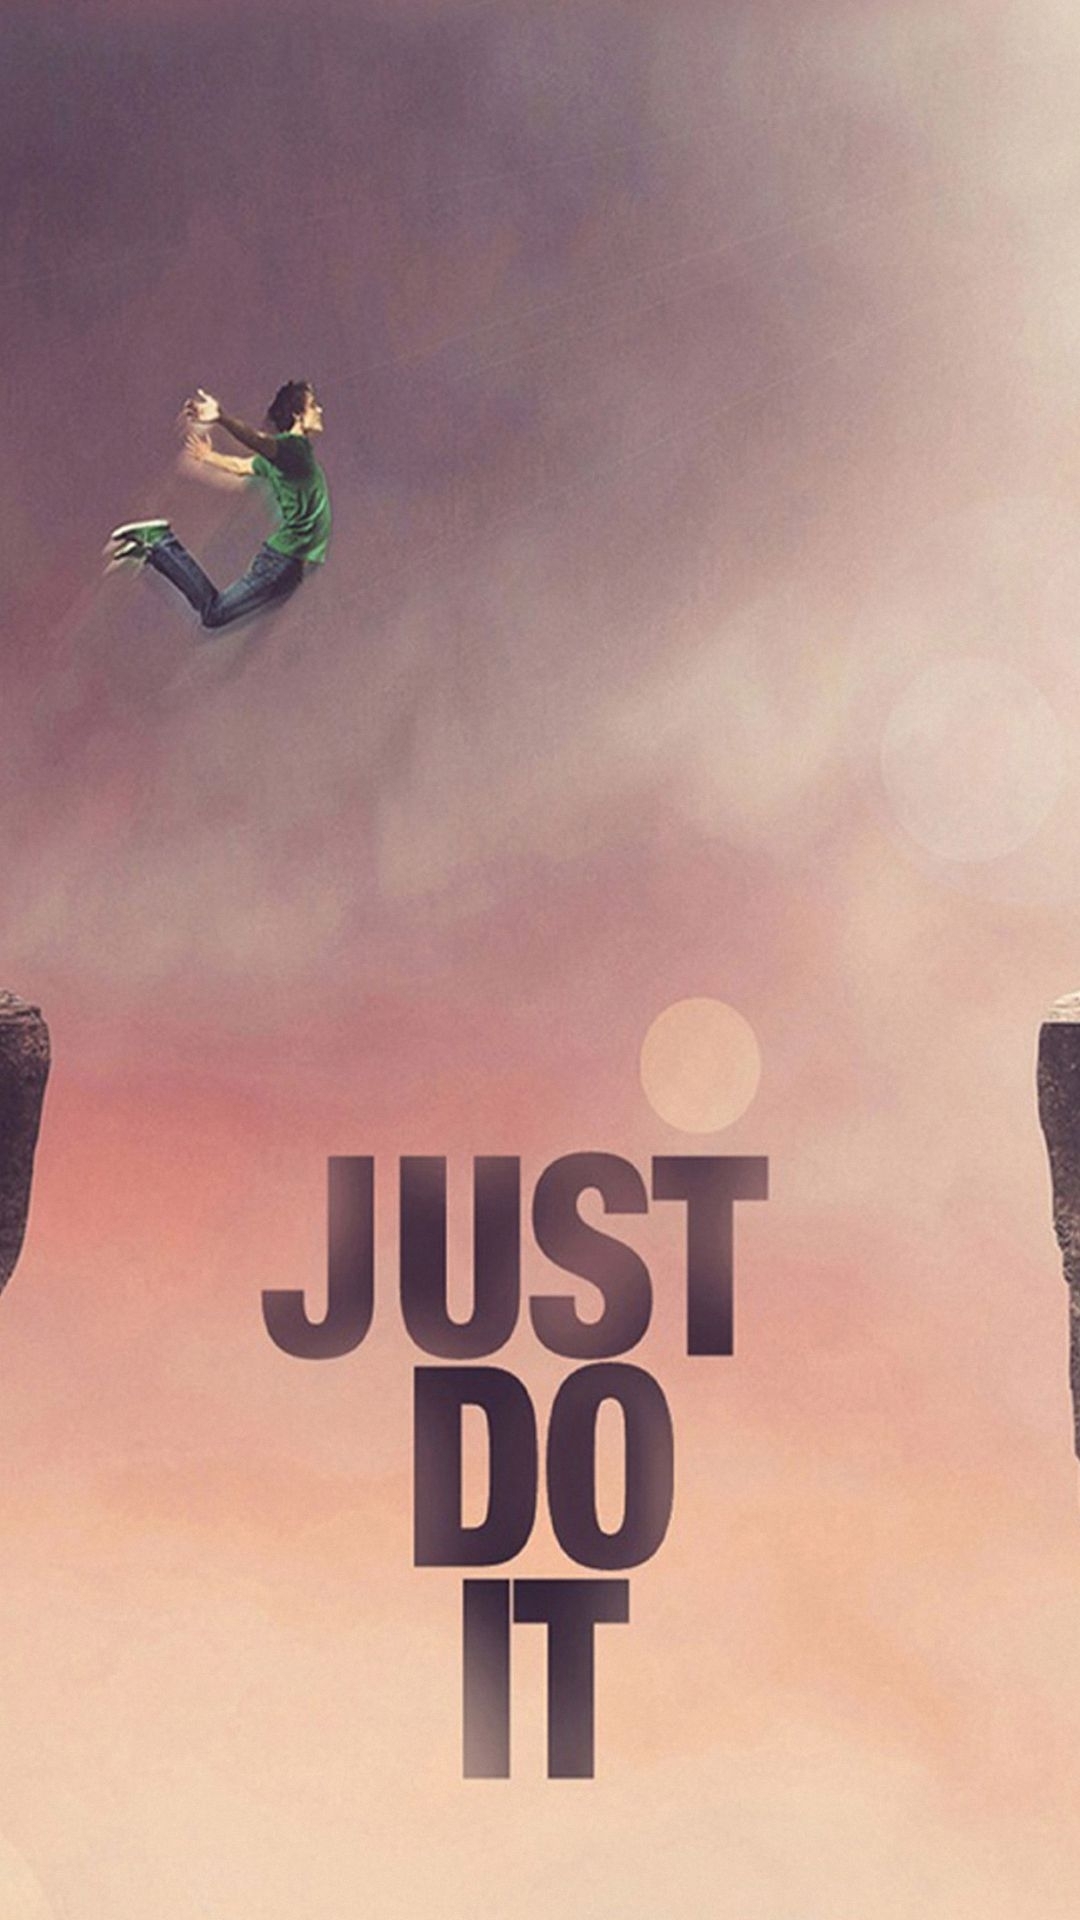 10 Most Popular Just Do It Iphone Wallpaper FULL HD 1920×1080 For PC